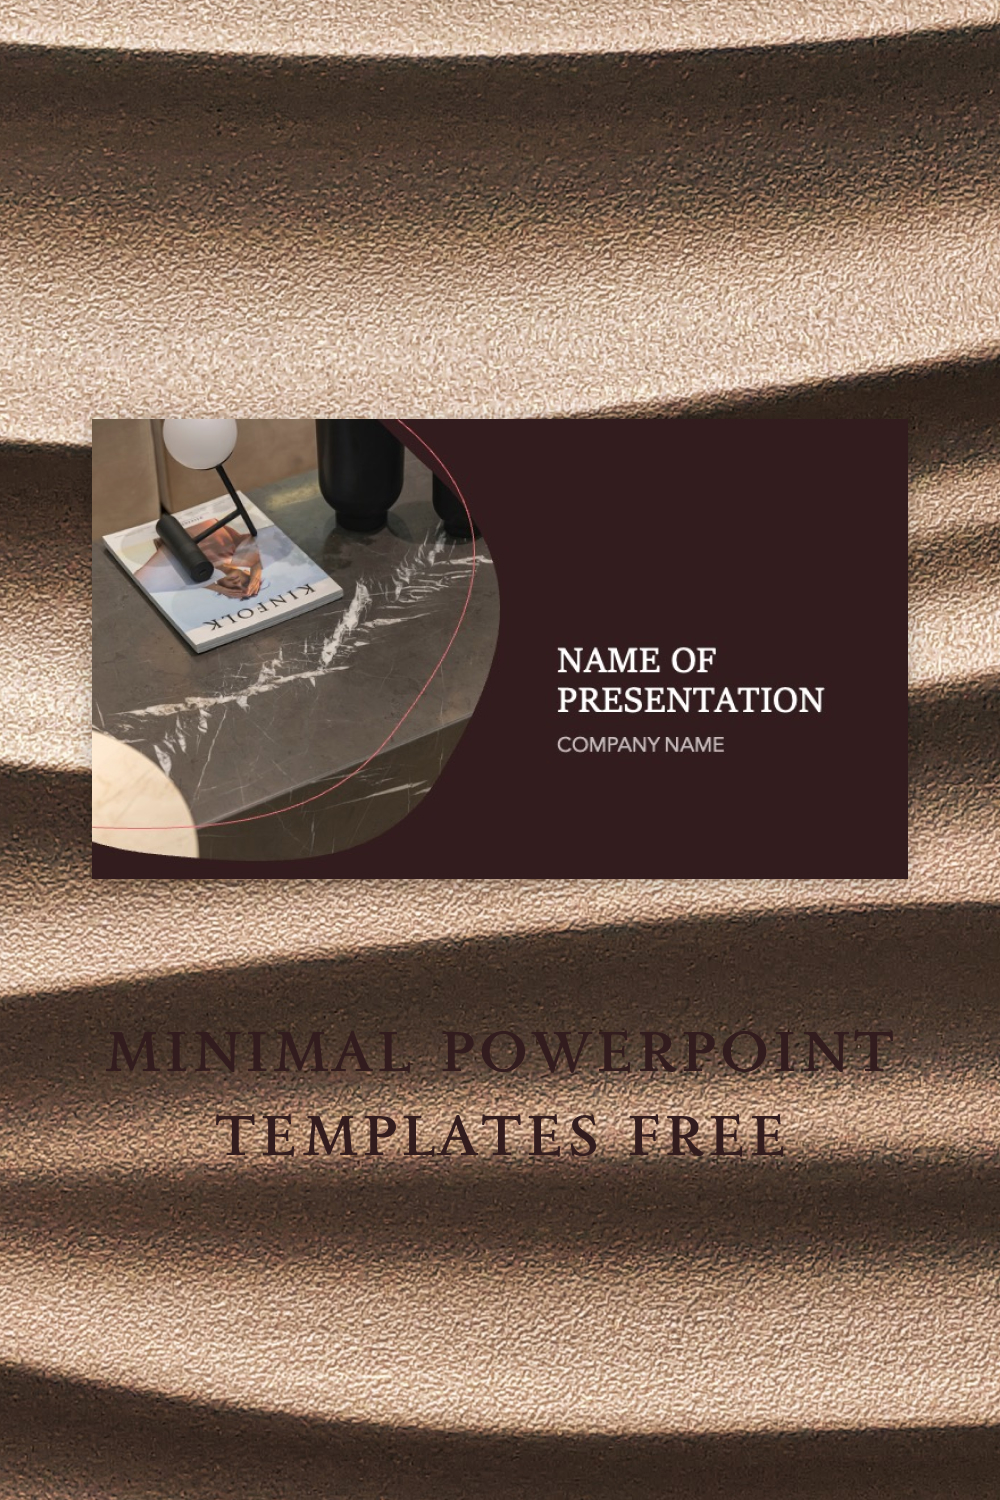 Powerpoint templates free of pinterest.